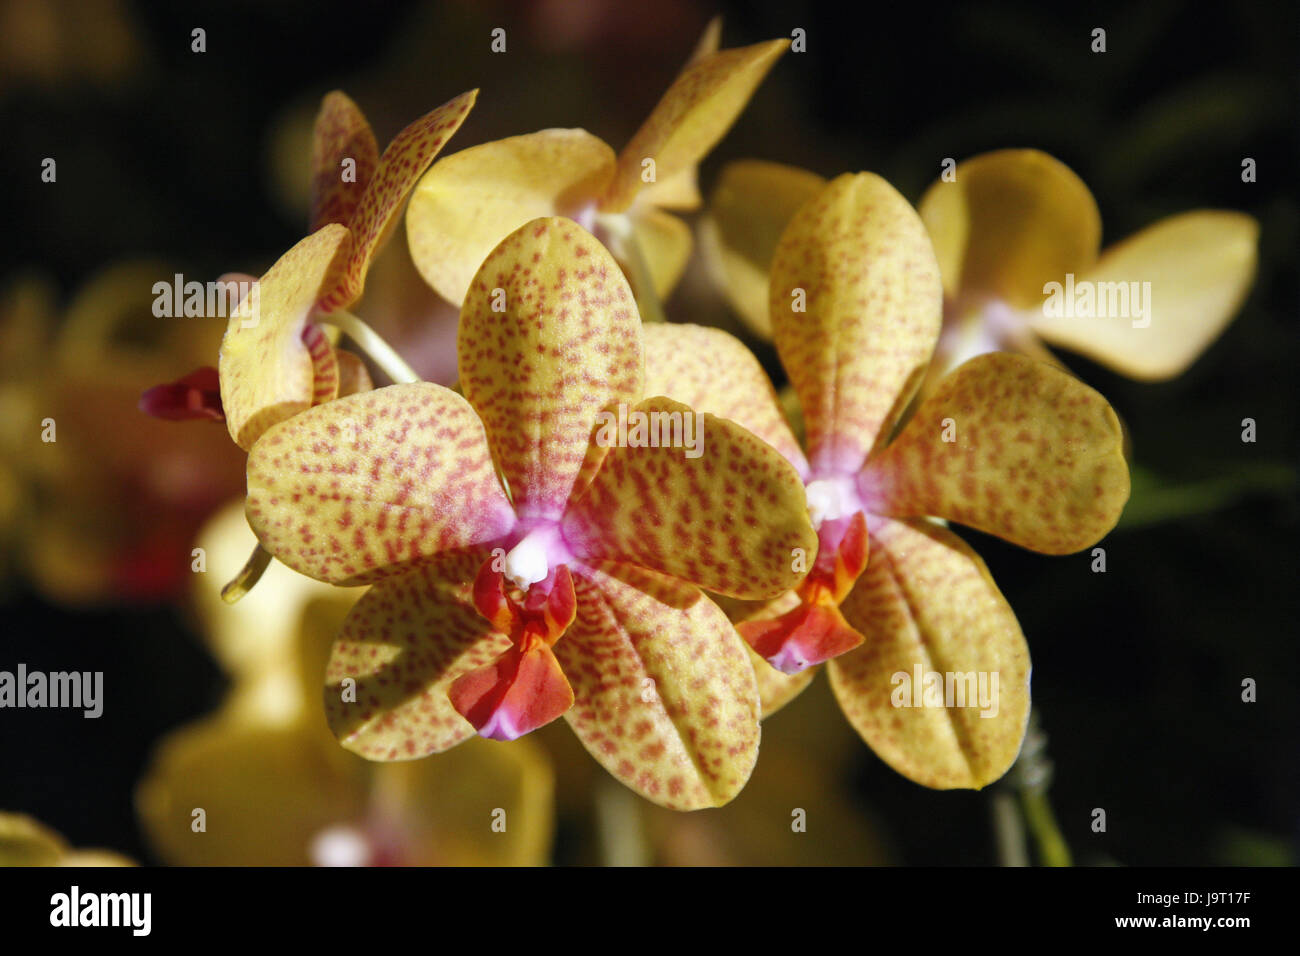 Orchids,Phalaenopsis,flowers,orchid blossoms,blossom,plant,ornamental plant,flower,ornamental flower,exotic,tropical,patterned,orchid genus,orchid blossom,yellow,speckled,orchid exhibit,land horticultural show,exhibit, Stock Photo